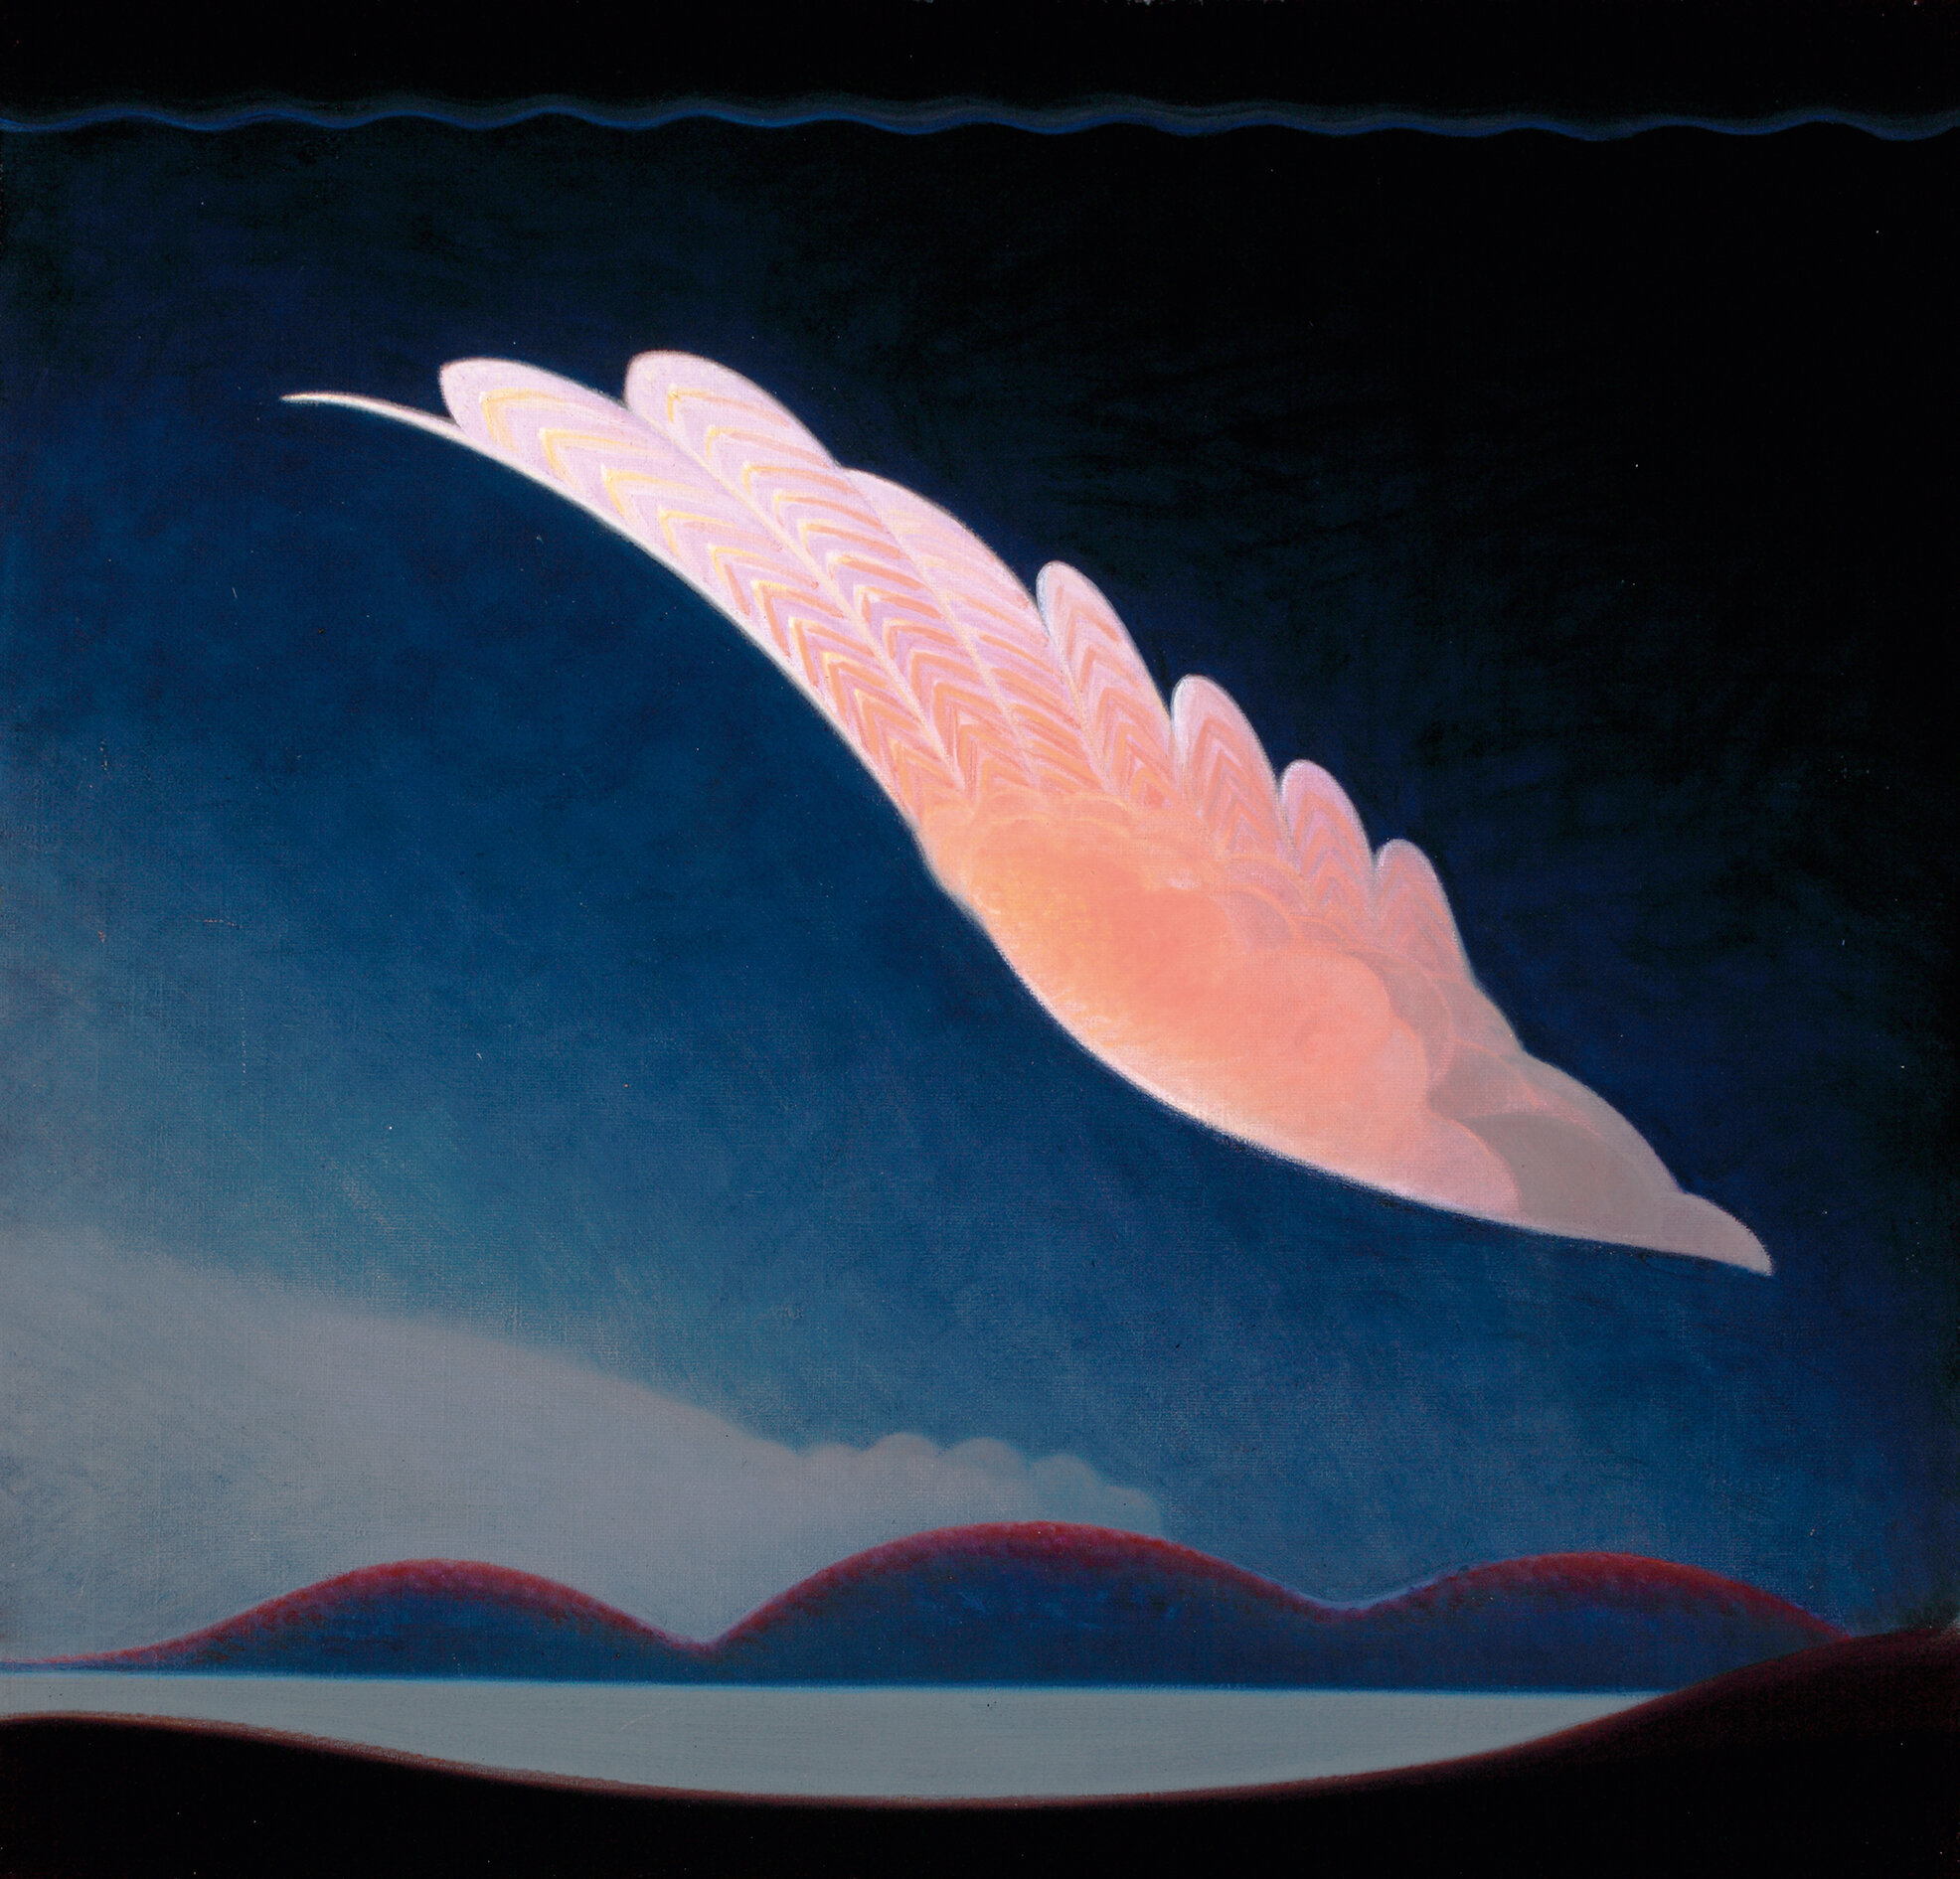 Agnes Pelton. “The Primal Wing” (1933). &nbsp;Oil on canvas. 24” x 25”. Courtesy The San Diego Museum of Art.&nbsp;Victoria Turner, Sarah. Enchanted Modernities: Theosophy, the Arts and the American West. Fulgur. Sept 2019.